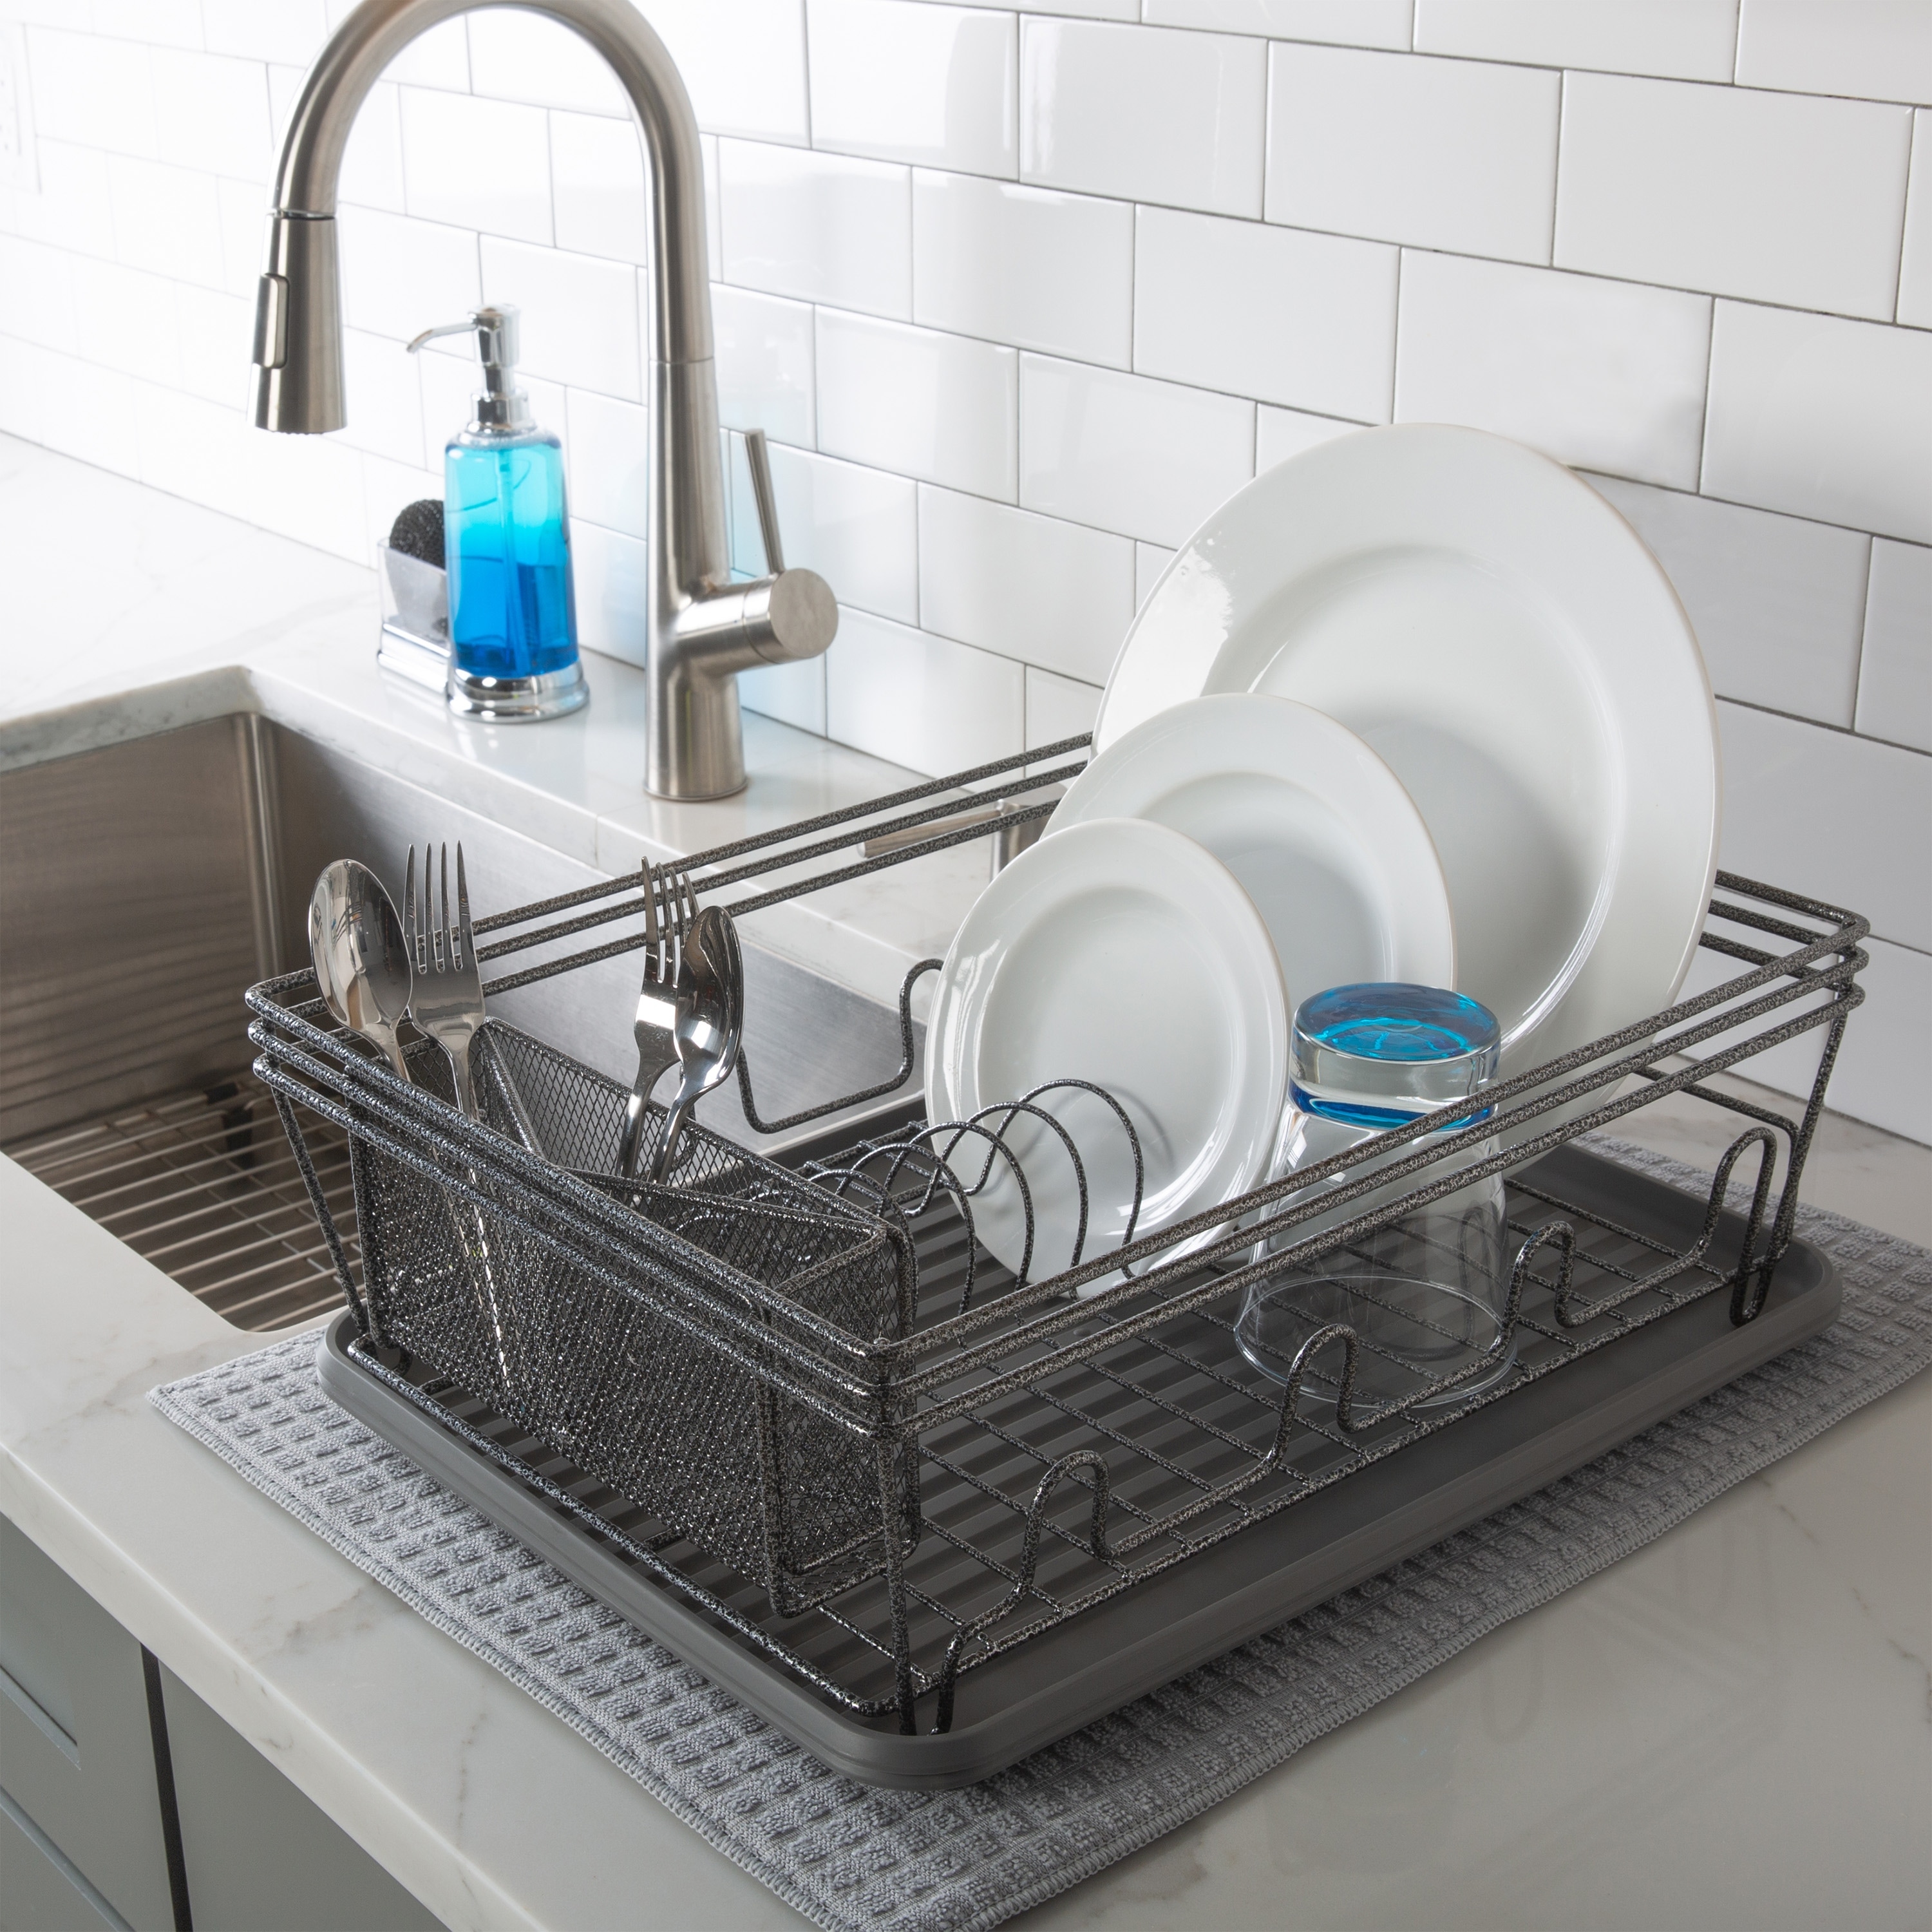 https://ak1.ostkcdn.com/images/products/is/images/direct/ab87314504841a7d3b6a6d34fbf576ef4cab1ba6/Laura-Ashley-Speckled-Dish-Rack-Set-in-Grey.jpg